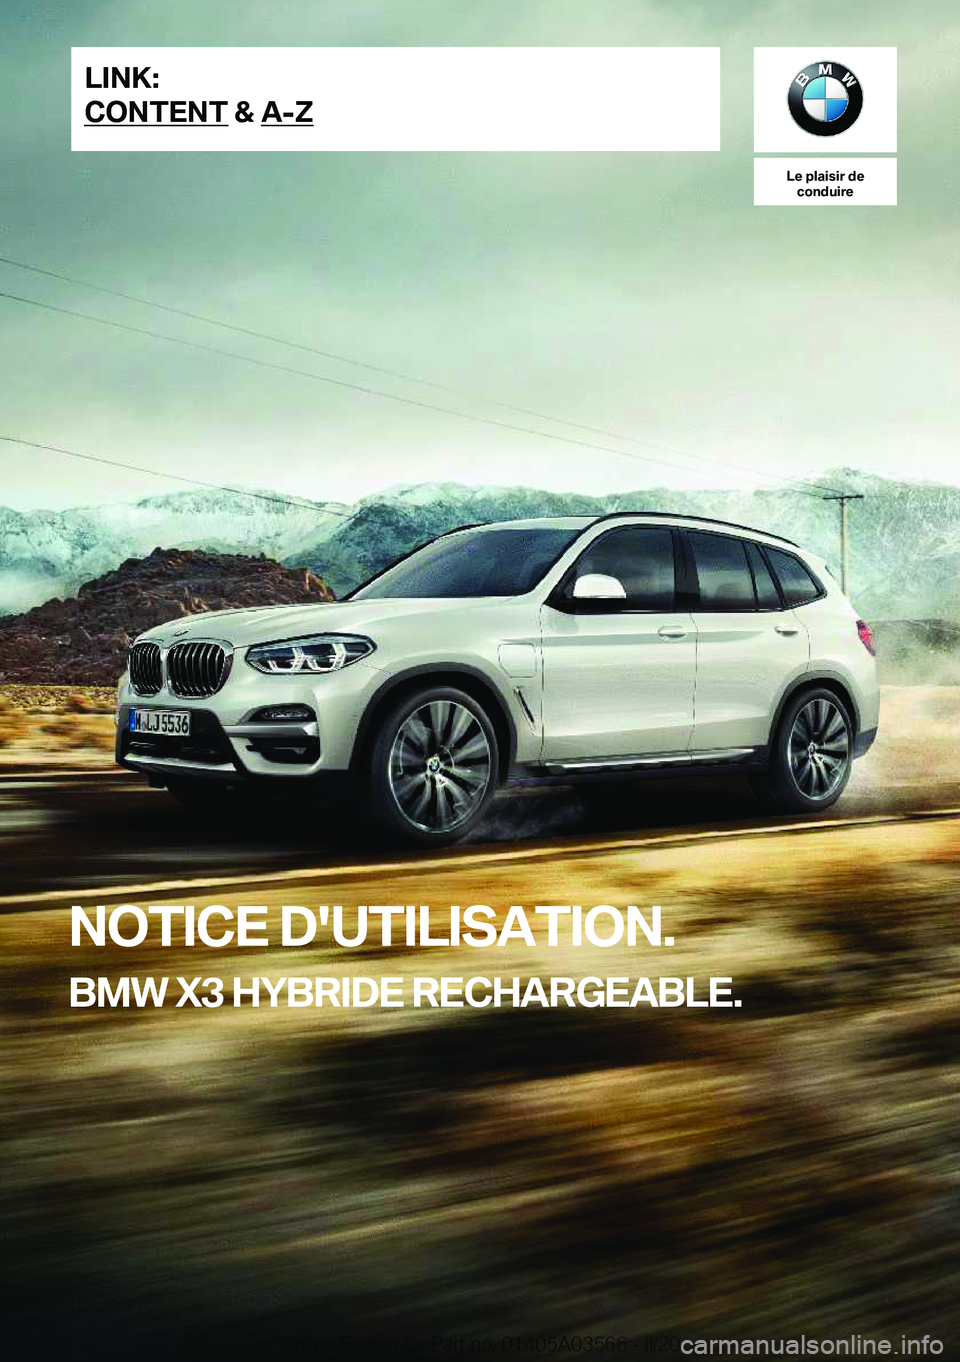 BMW X3 PLUG IN HYBRID 2020  Notices Demploi (in French) �L�e��p�l�a�i�s�i�r��d�e�c�o�n�d�u�i�r�e
�N�O�T�I�C�E��D�'�U�T�I�L�I�S�A�T�I�O�N�.
�B�M�W��X�3��H�Y�B�R�I�D�E��R�E�C�H�A�R�G�E�A�B�L�E�.�L�I�N�K�:
�C�O�N�T�E�N�T��&��A�-�Z�O�n�l�i�n�e��E�